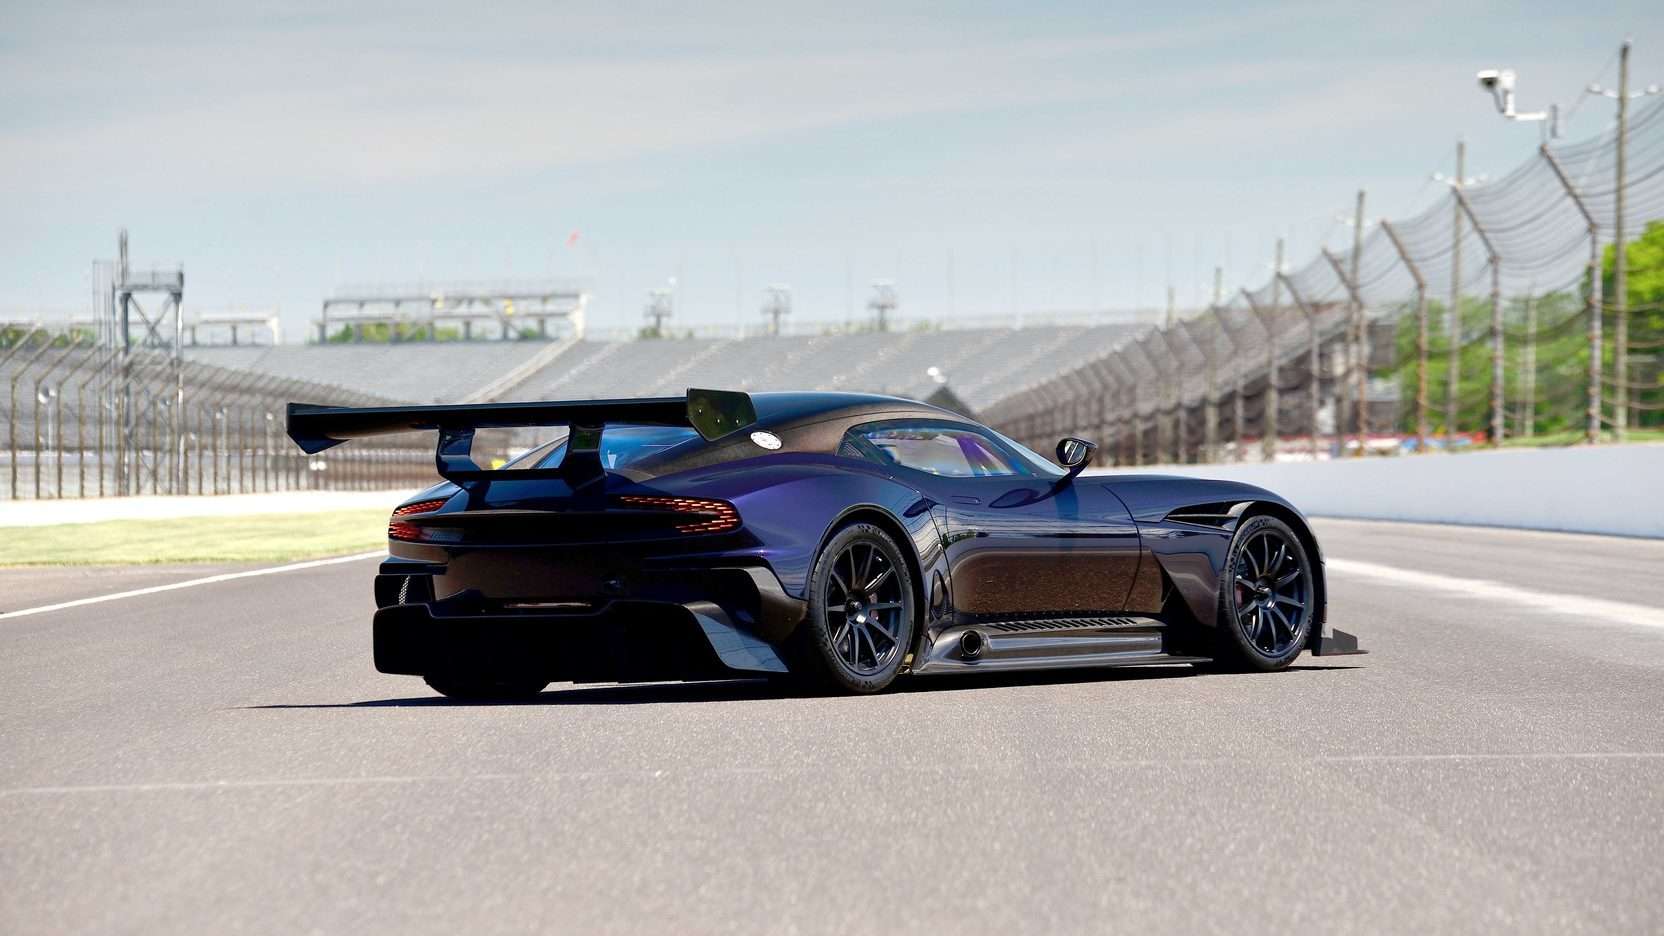 An Aston Martin Vulcan Will be Auctioned at the 2016 Monterey Car Week